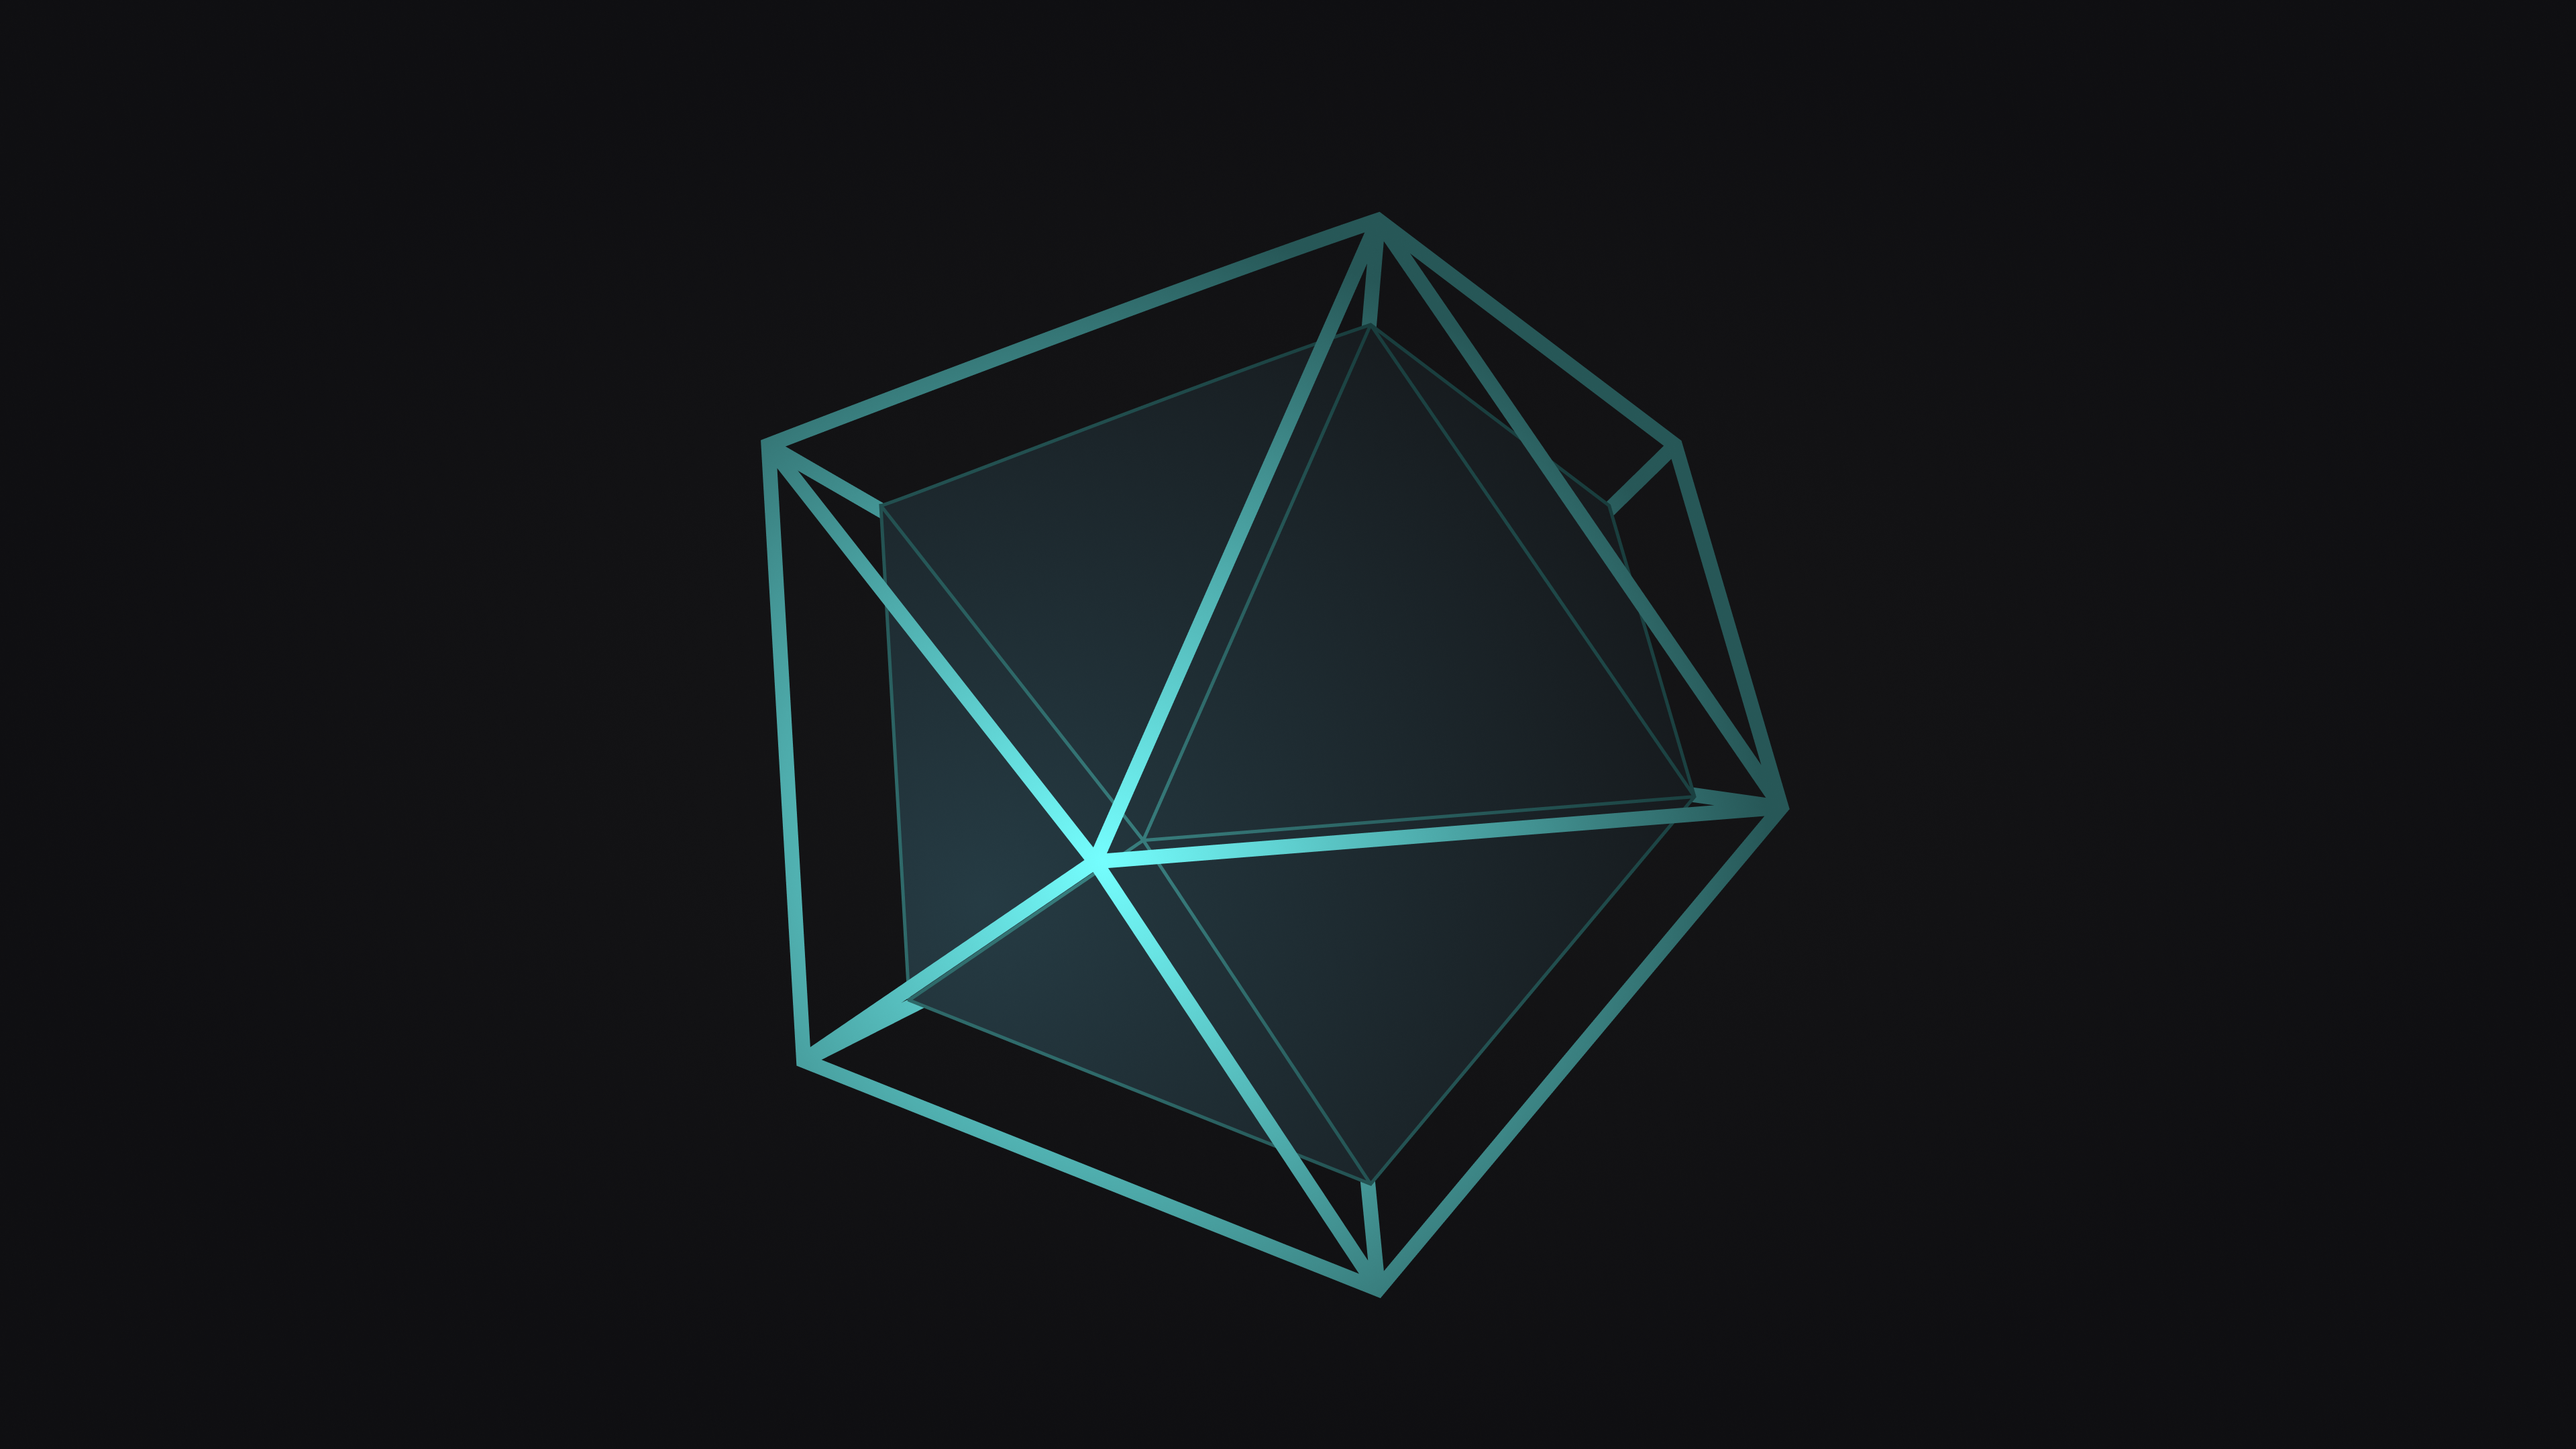 General 3840x2160 poly polygon art 3D Abstract abstract outline simple background digital art shapes dark background CGI